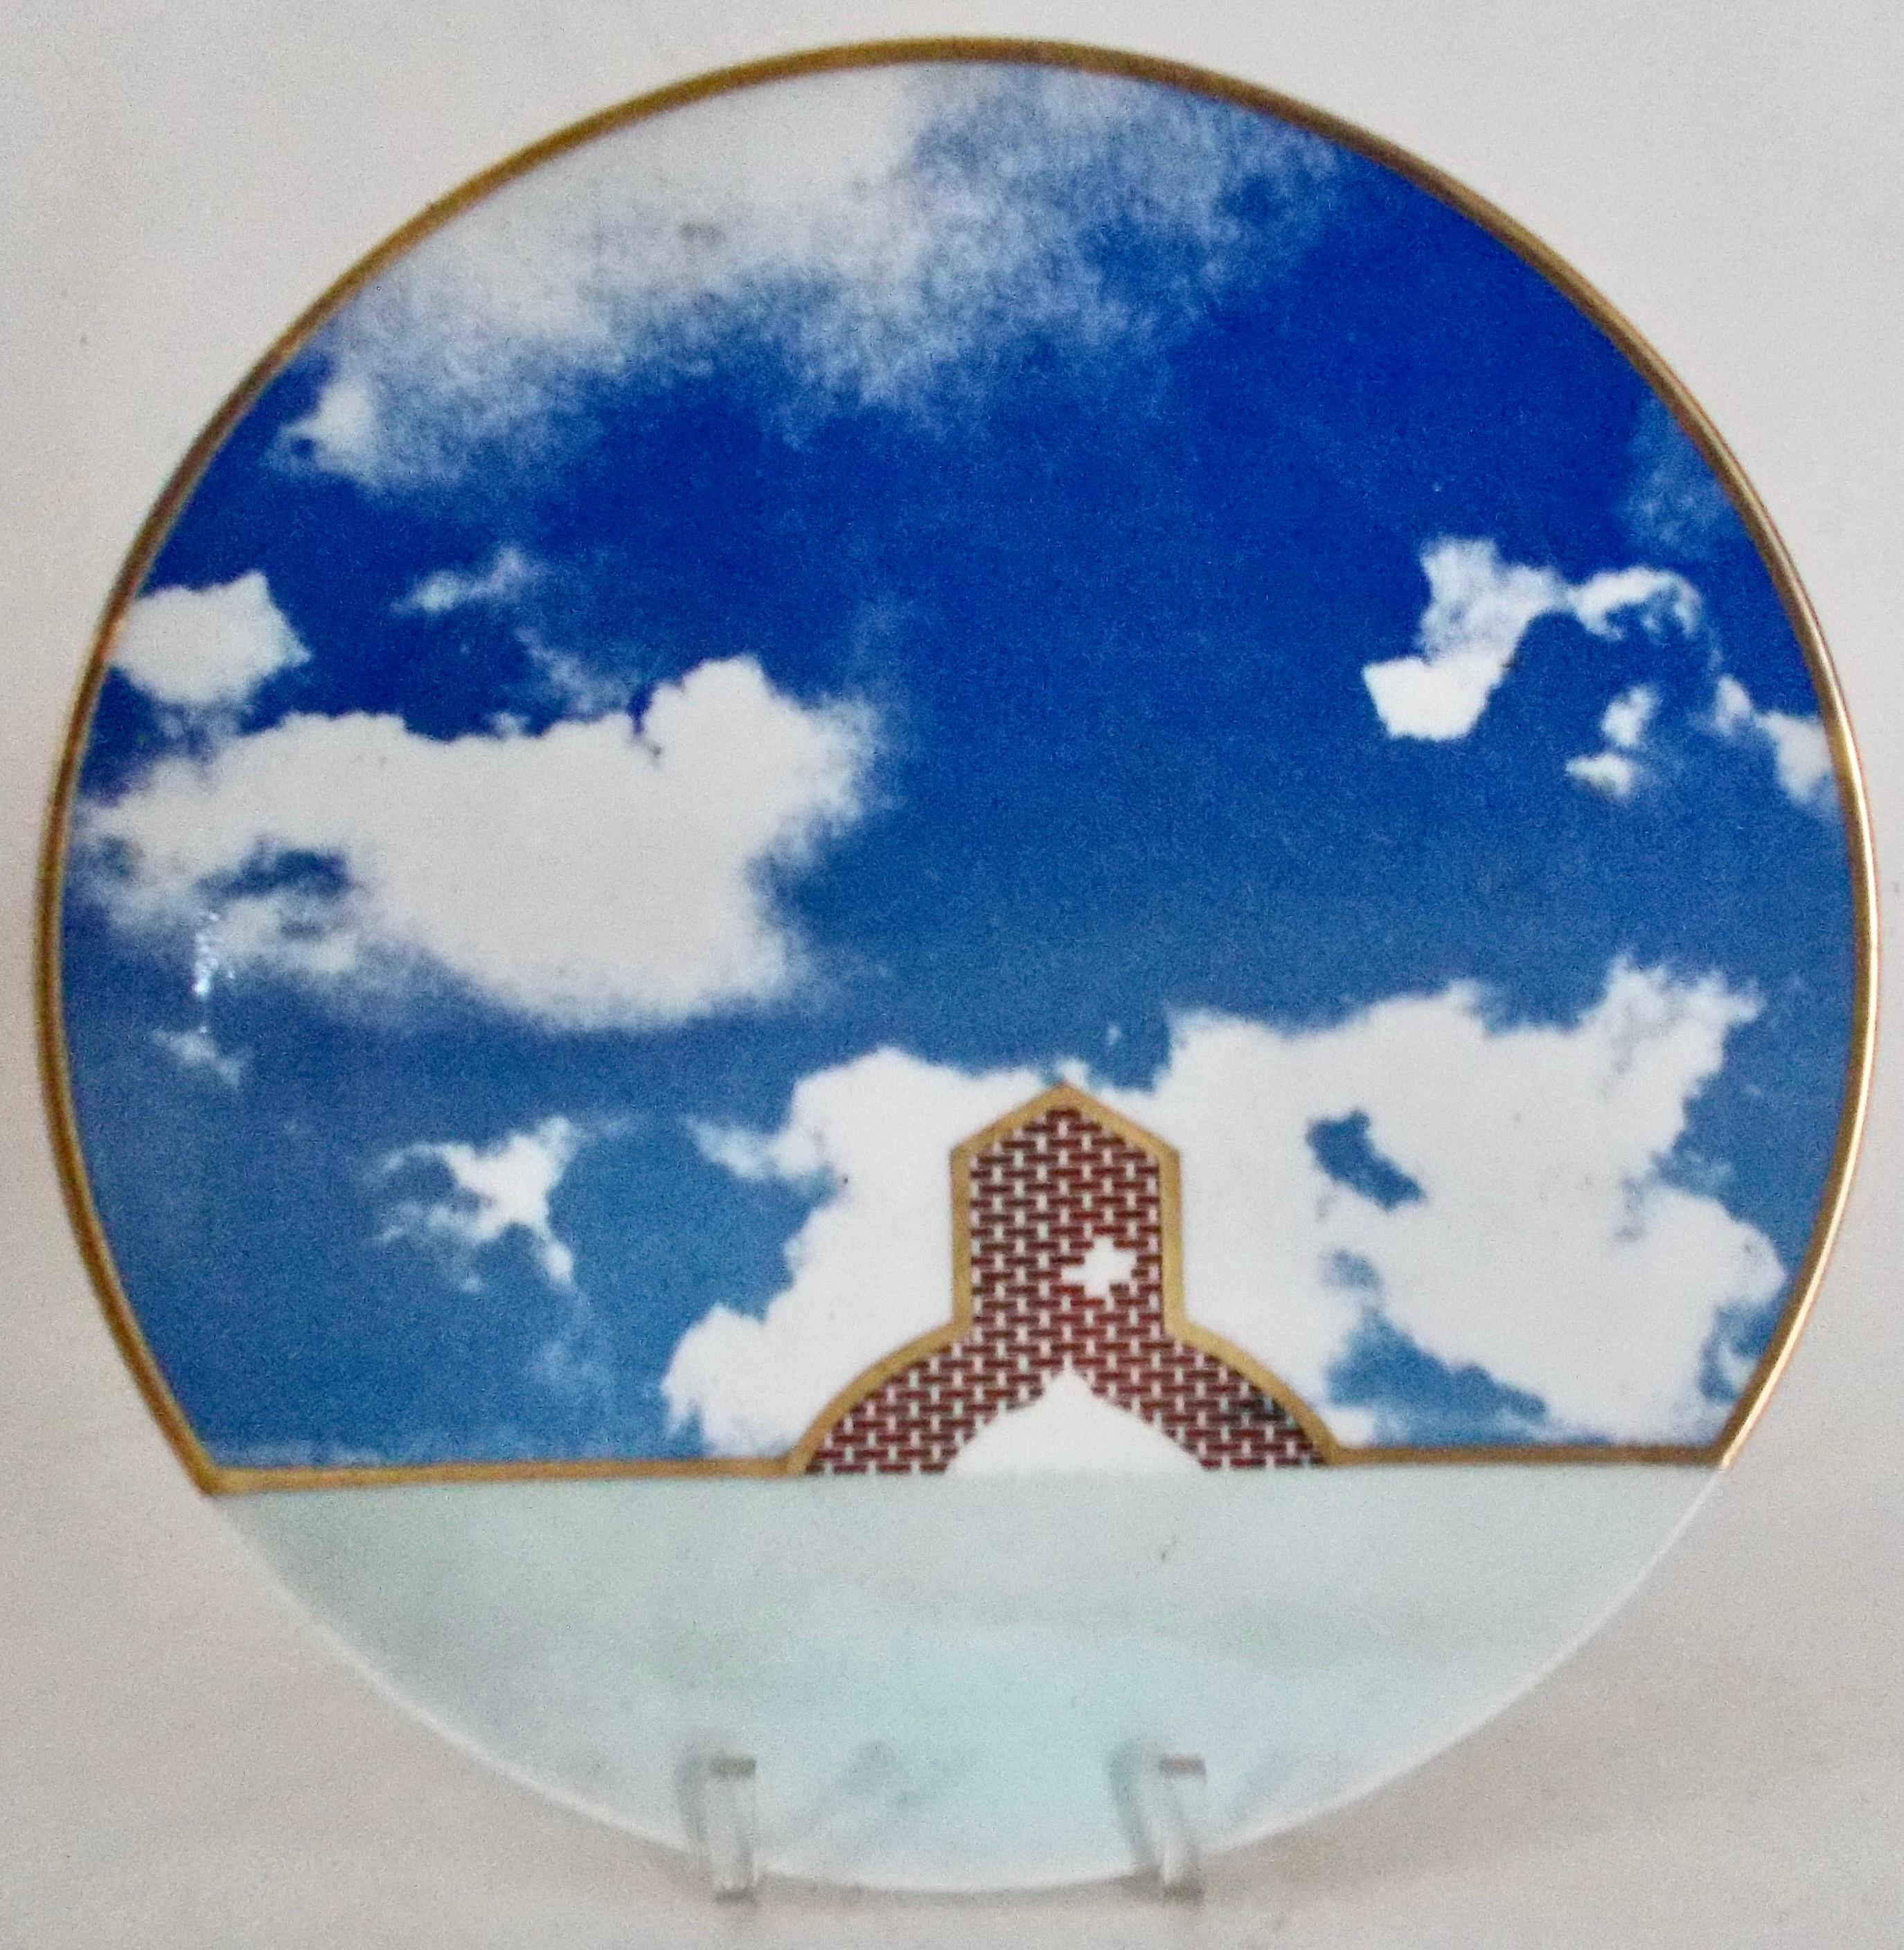 Stanley Tigerman post-modern image of sky and architecture. Rare original period porcelain 'transfer' printed plate, initialed and dated in gilt on the verso.